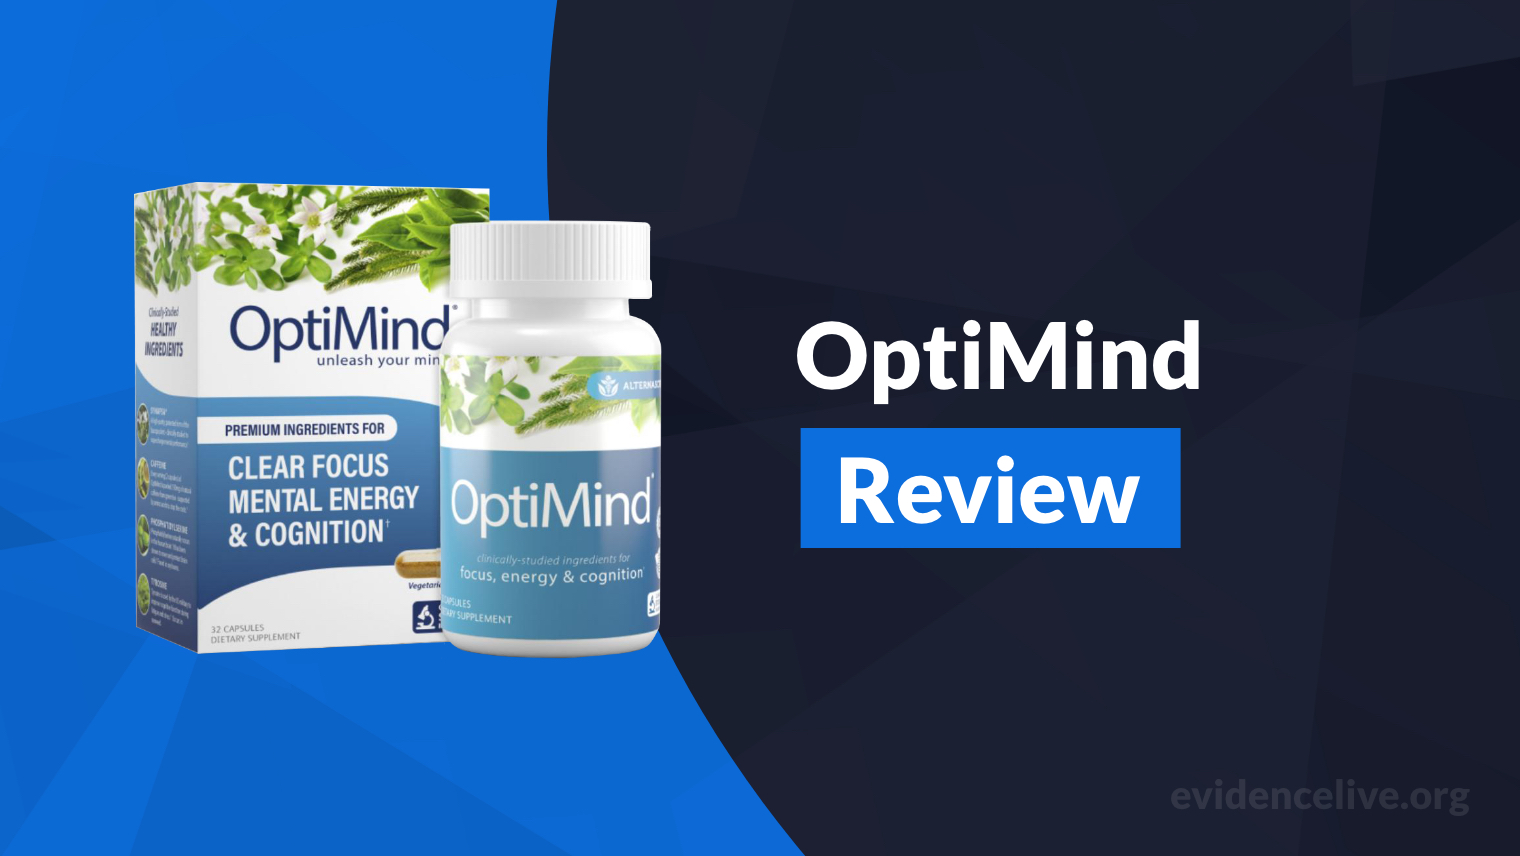 OptiMind Review: Is It Still a Legit Product?